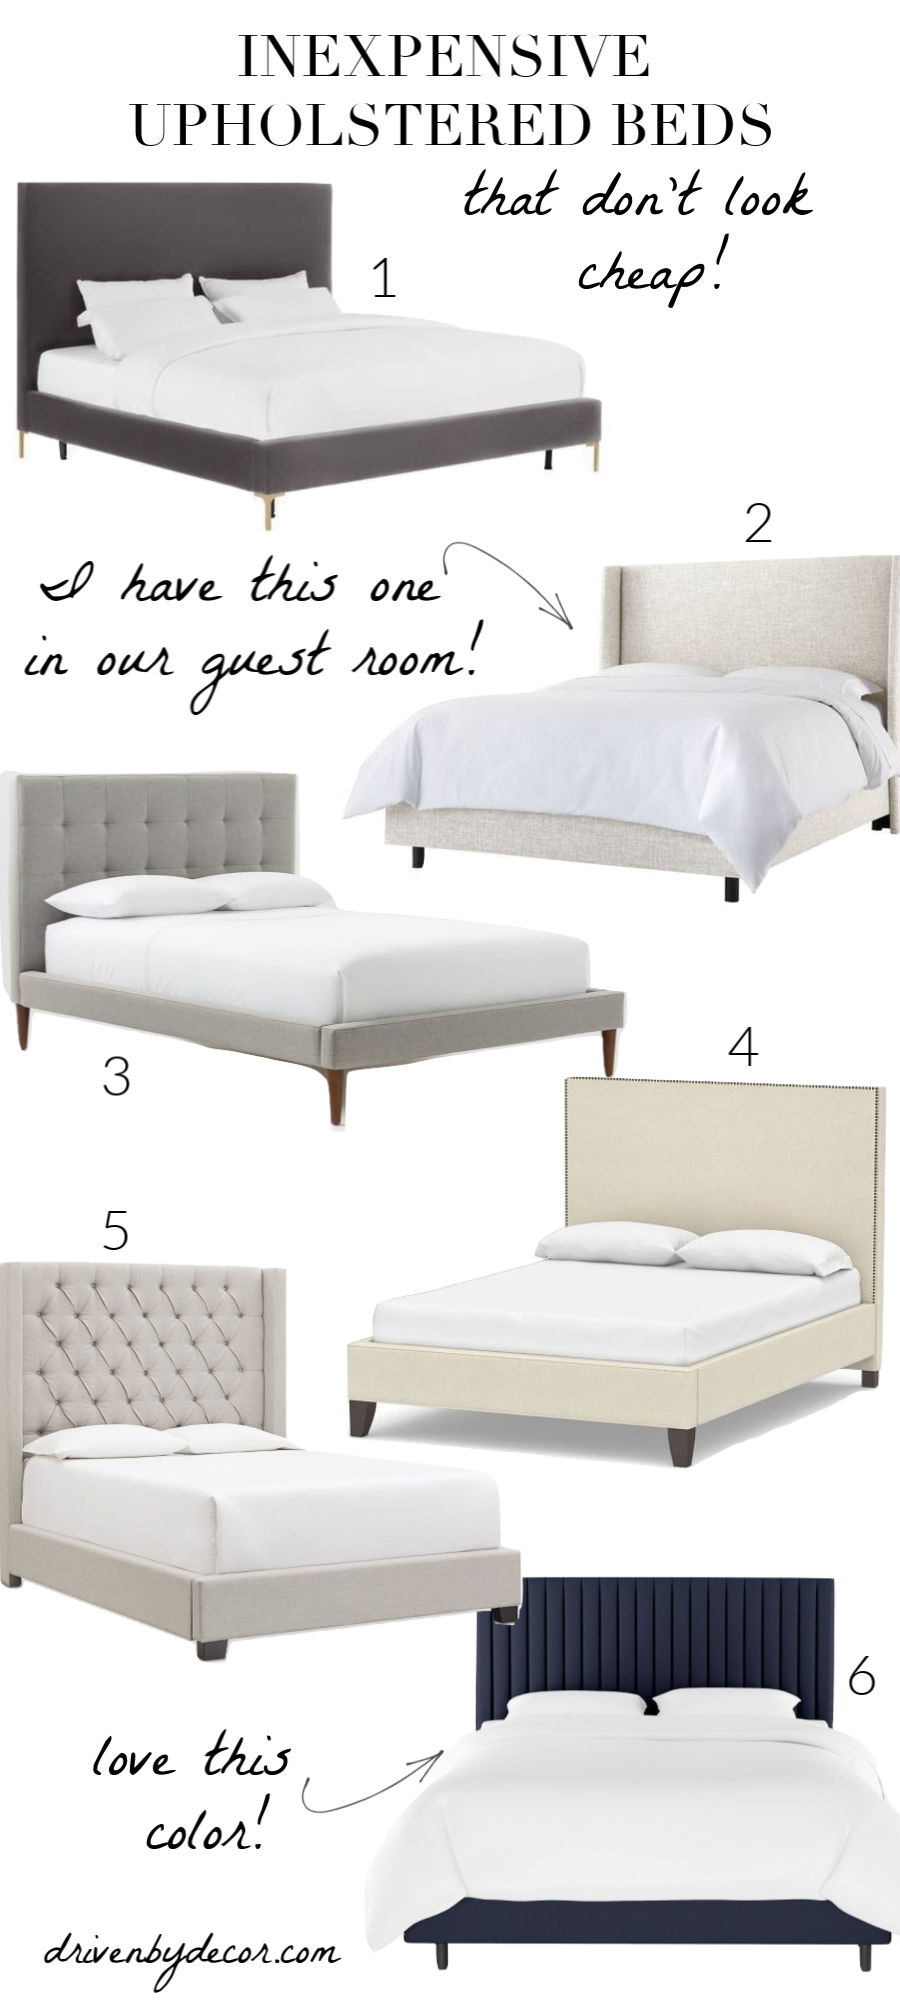 Crushing on these stylish upholstered beds that are pretty cheap!